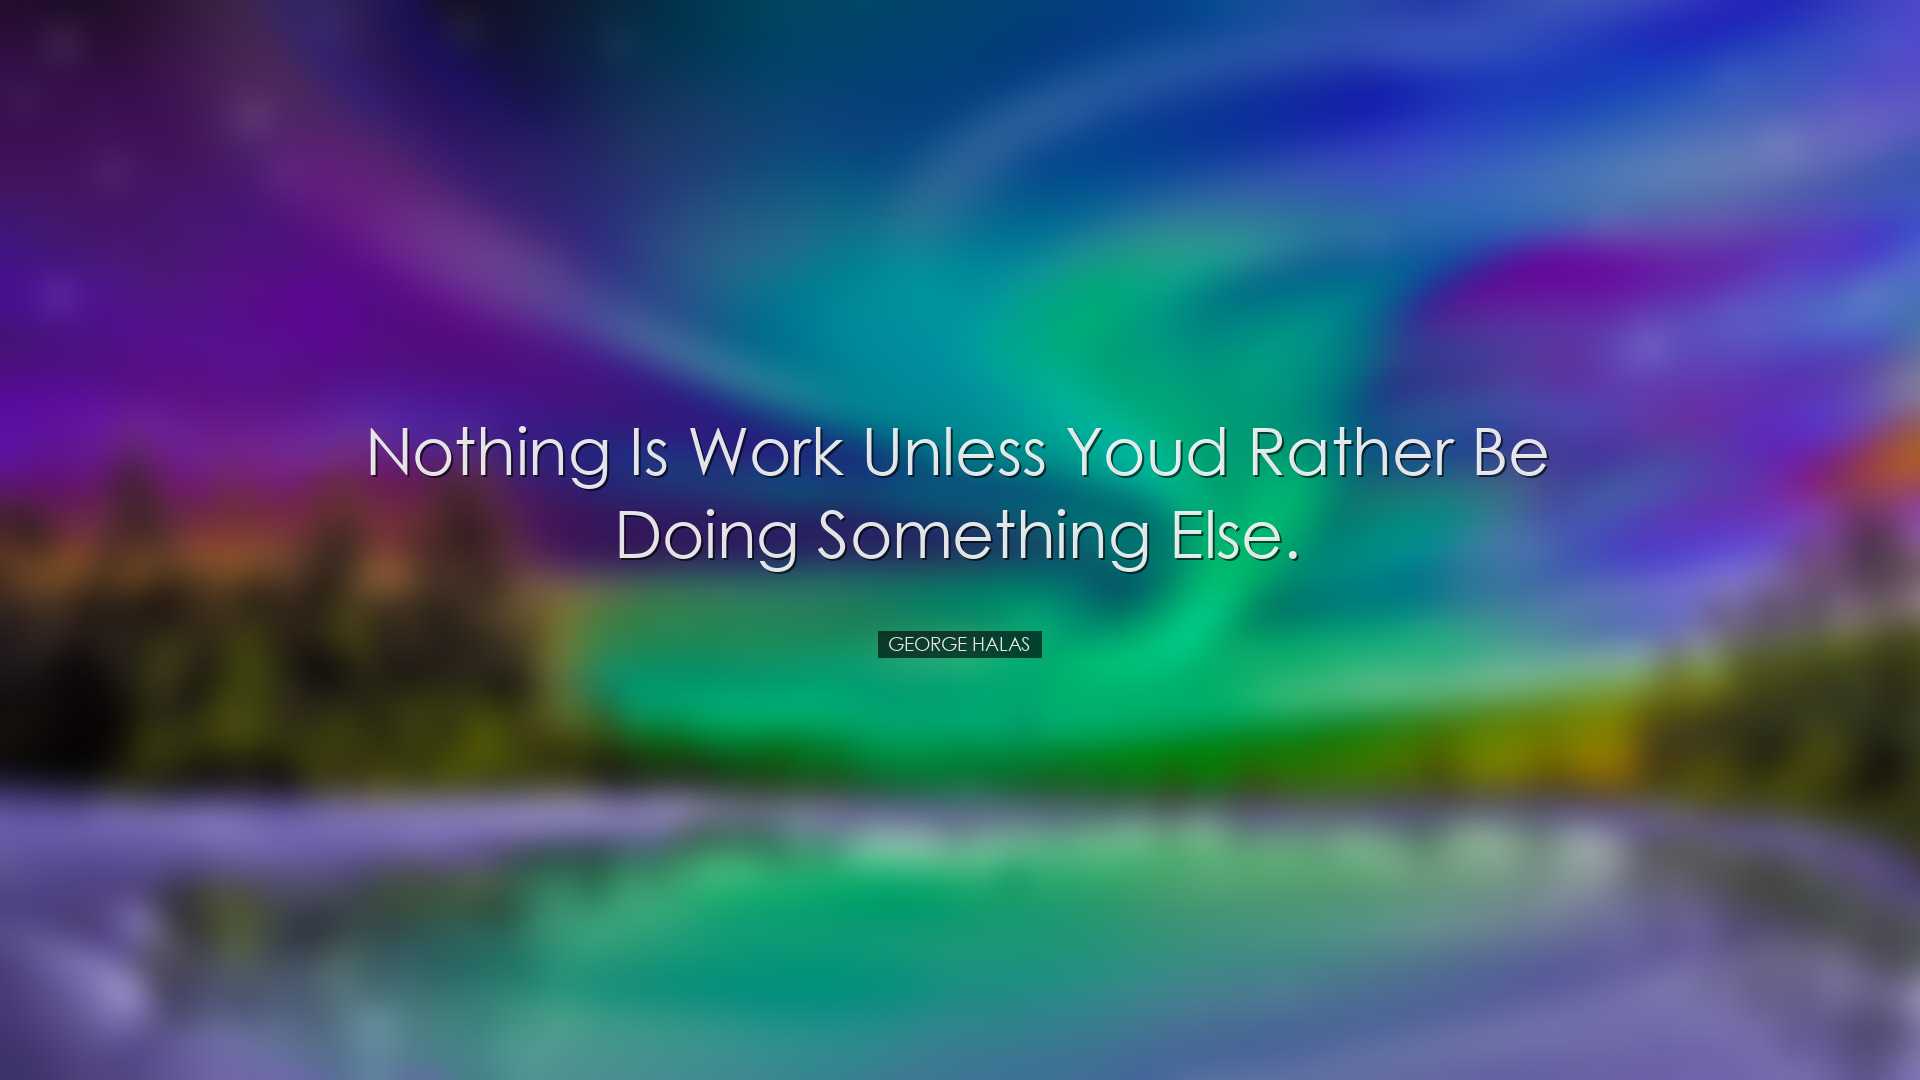 Nothing is work unless youd rather be doing something else. - Geor